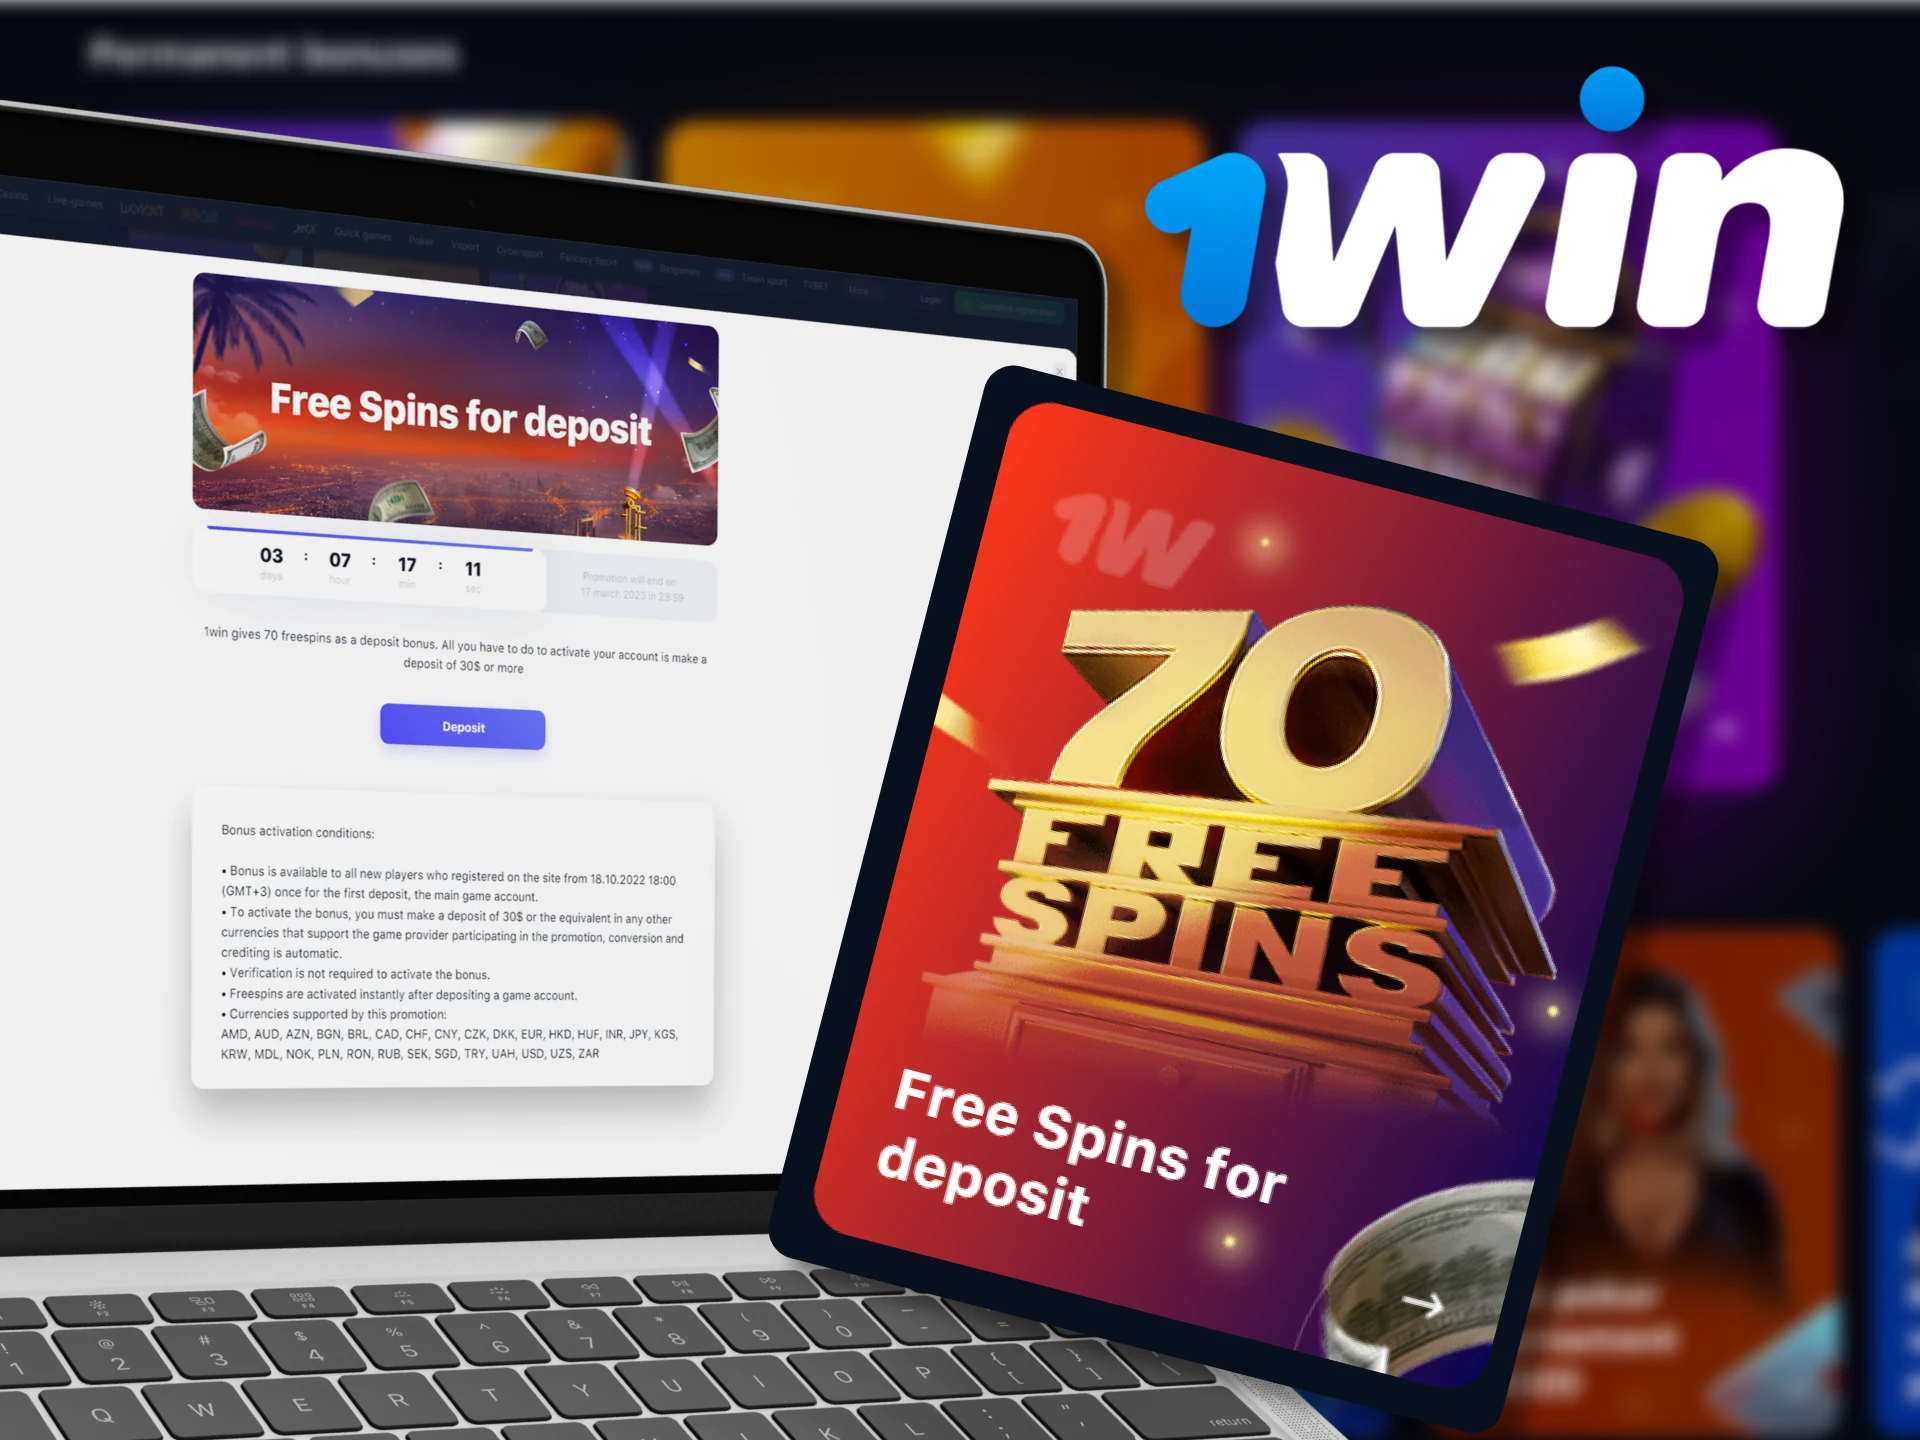 1win promo code for free spins